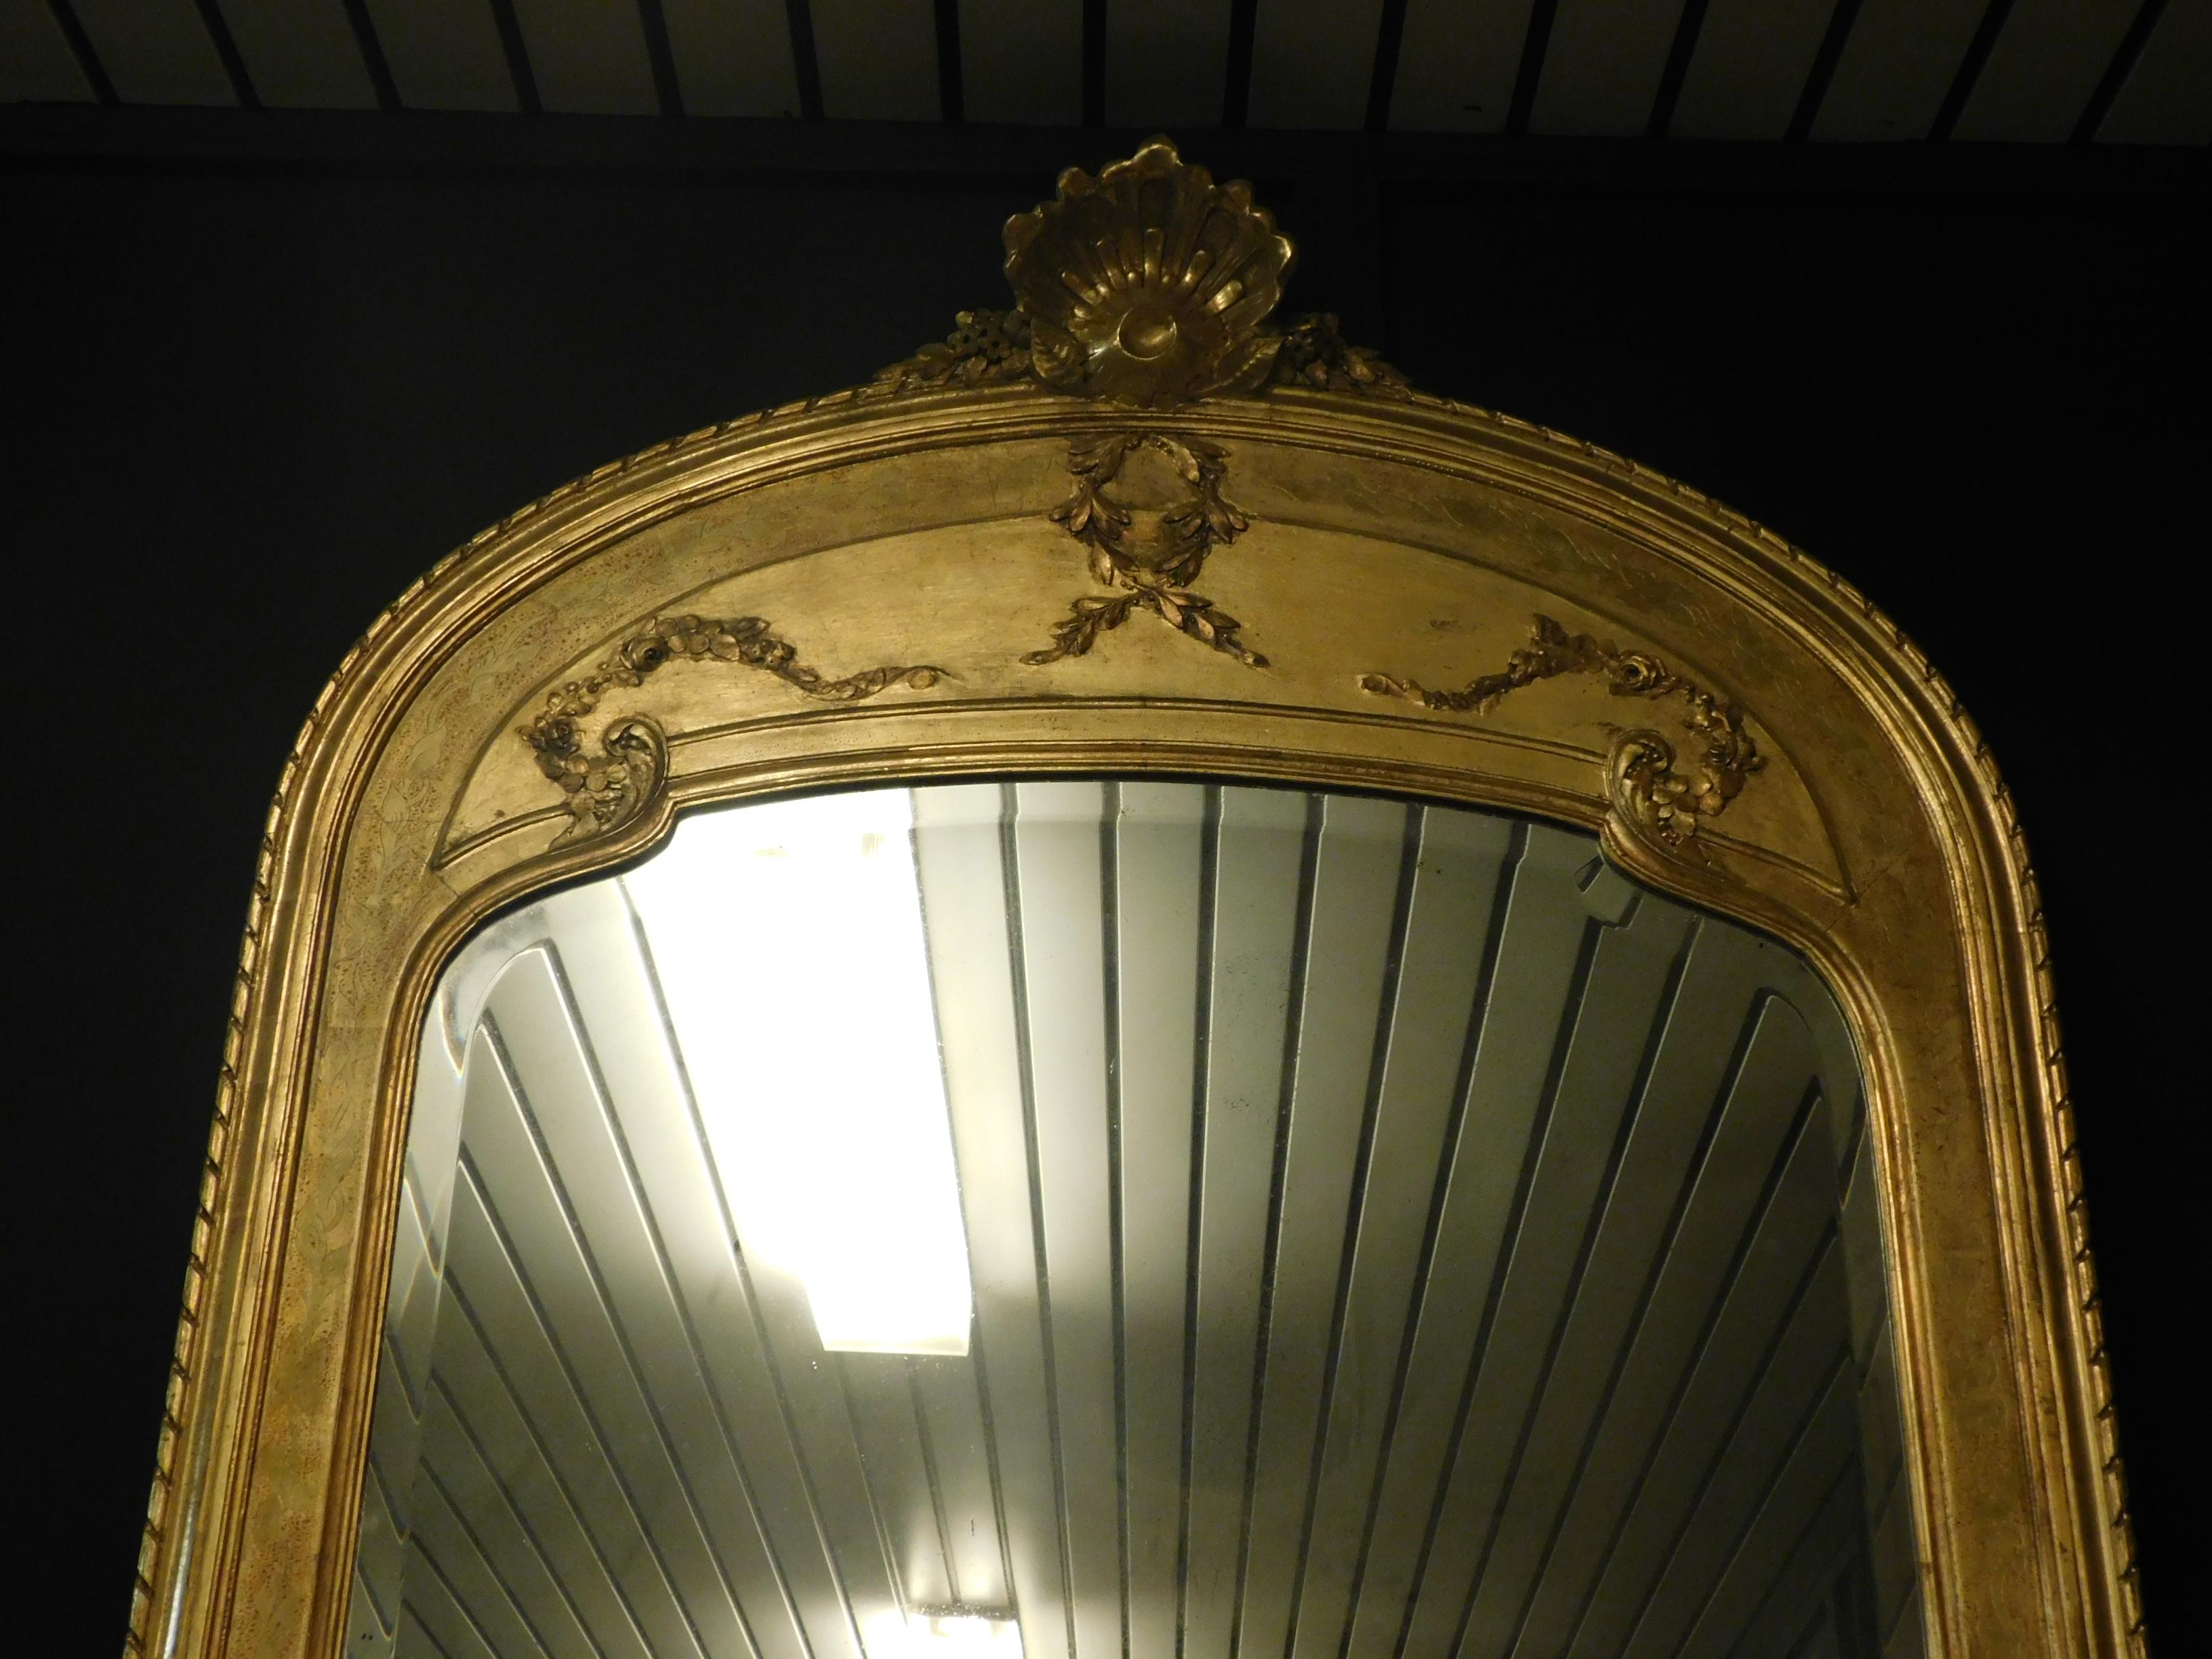 Wood Antique Mirror with Gilded Frame, Large Decorated Bezel, 19th Century Italy For Sale